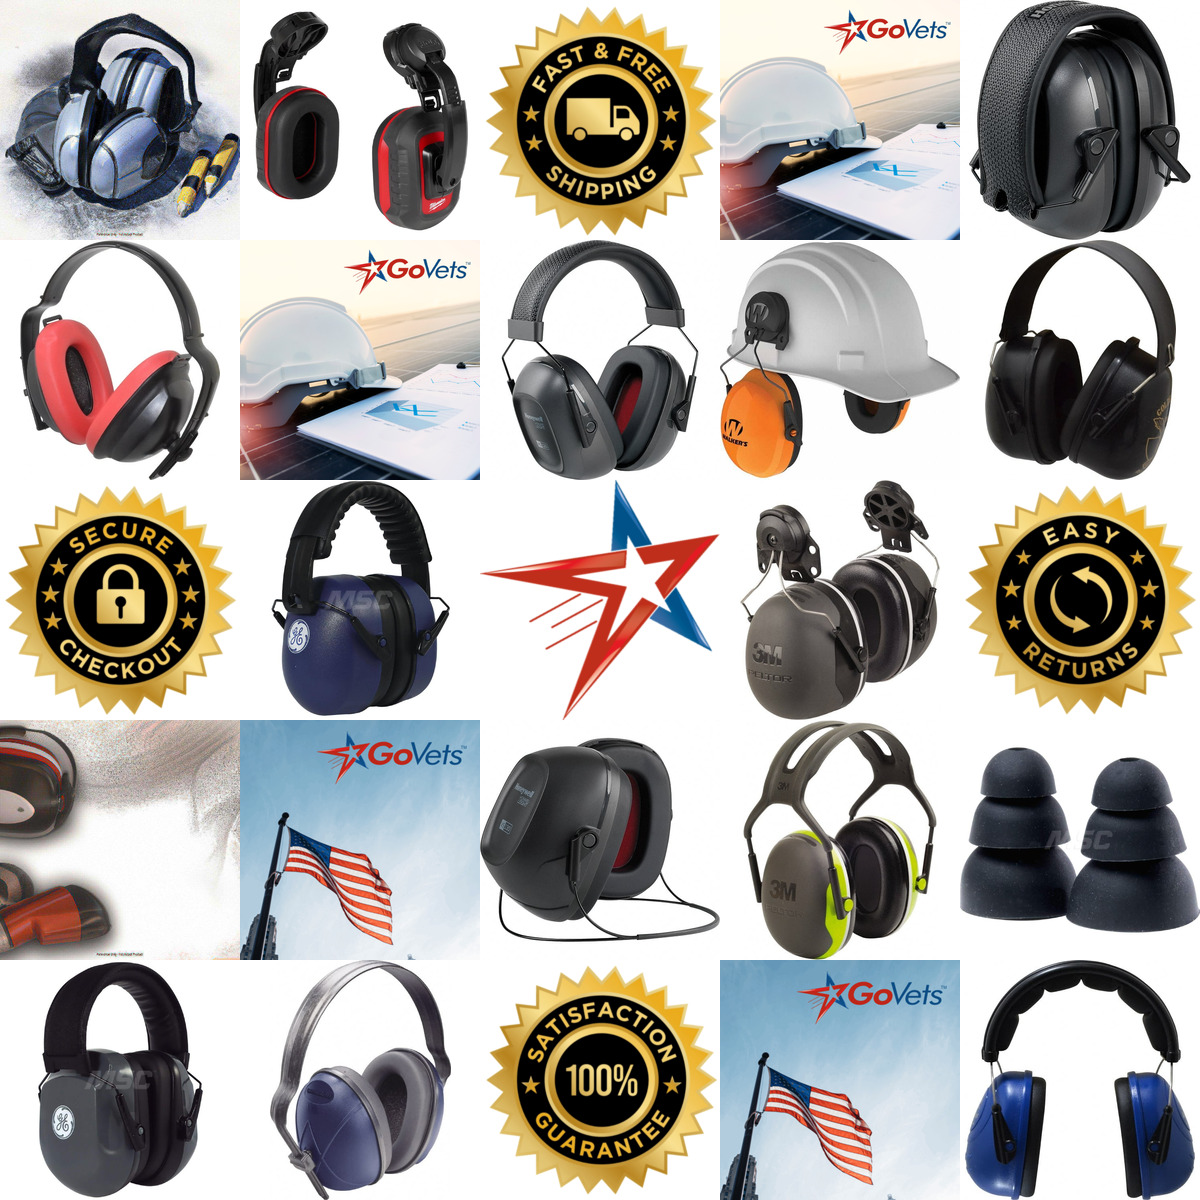 A selection of Earmuffs and Accessories products on GoVets